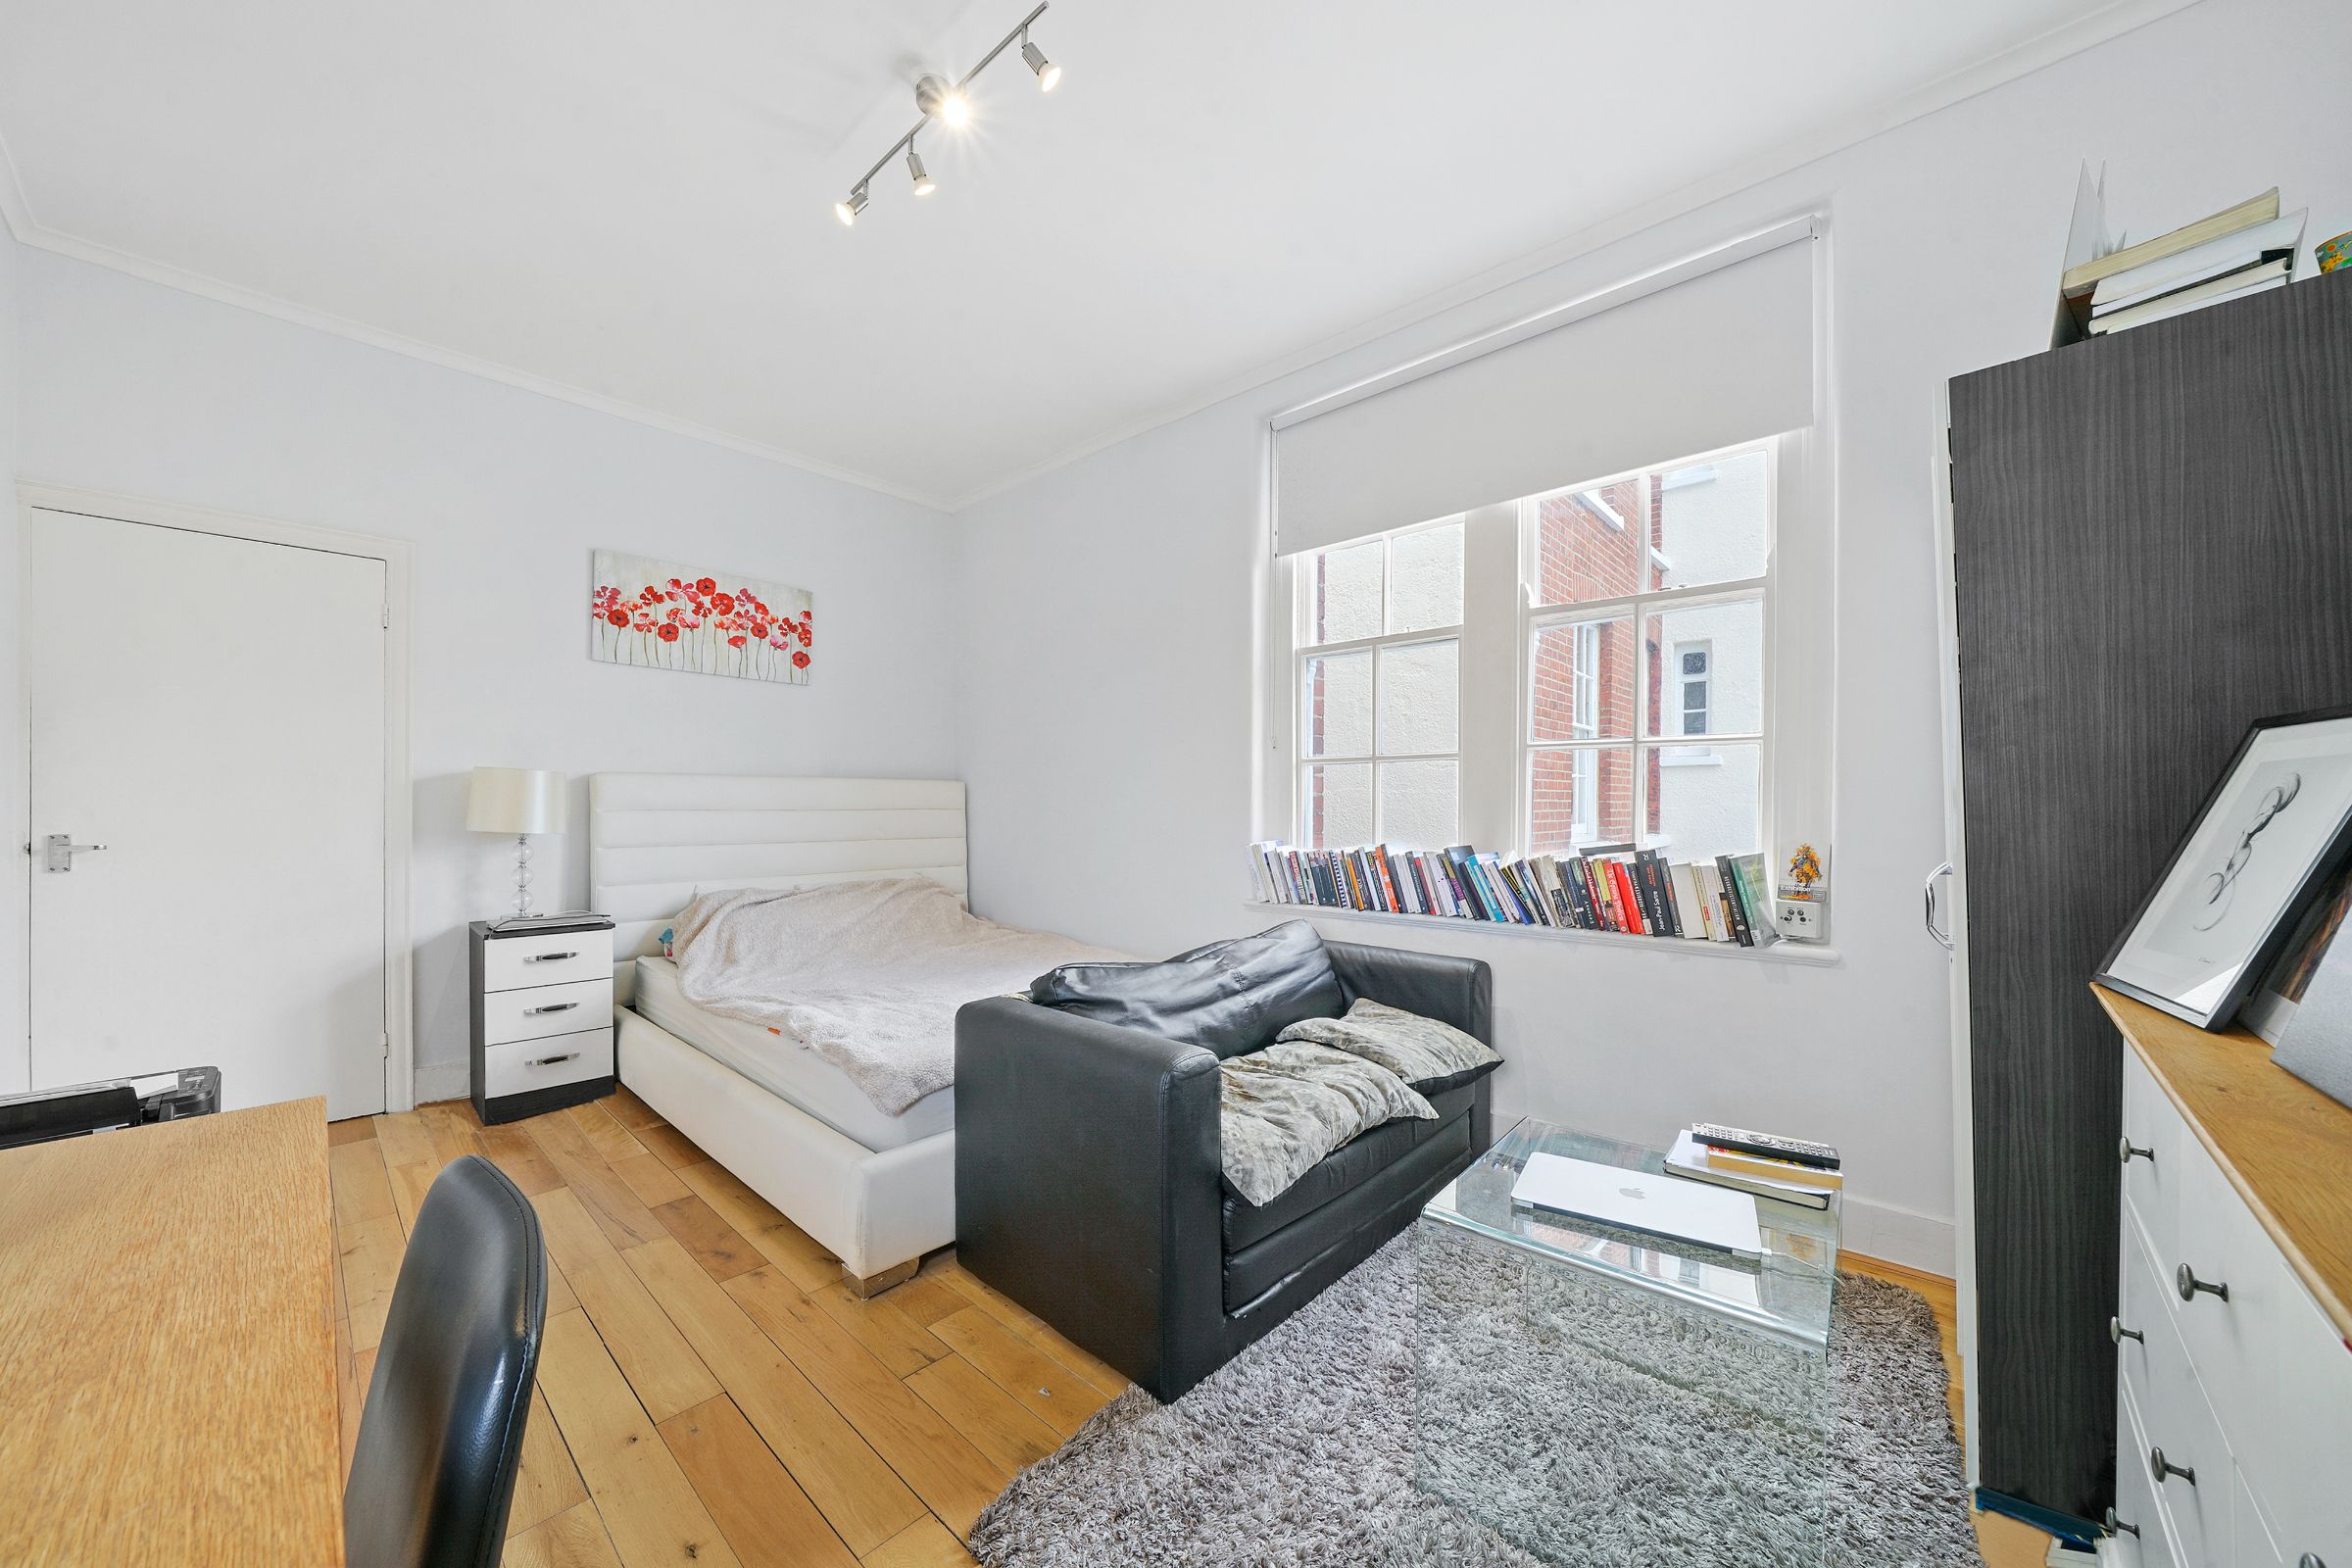 0 bed Studio for rent in London. From AbbeySpring London